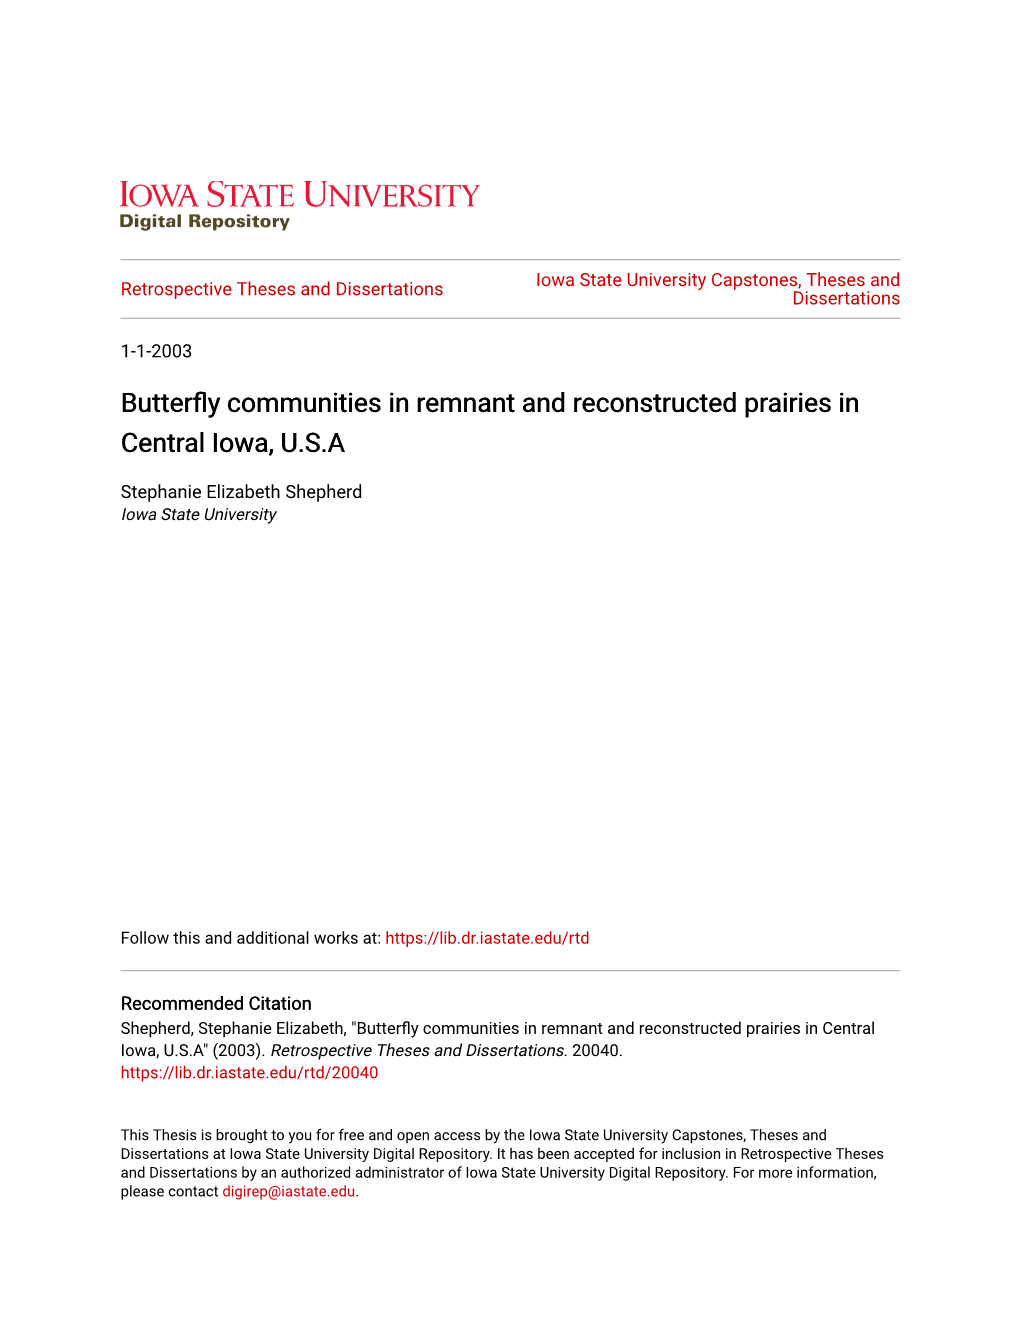 Butterfly Communities in Remnant and Reconstructed Prairies in Central Iowa, U.S.A